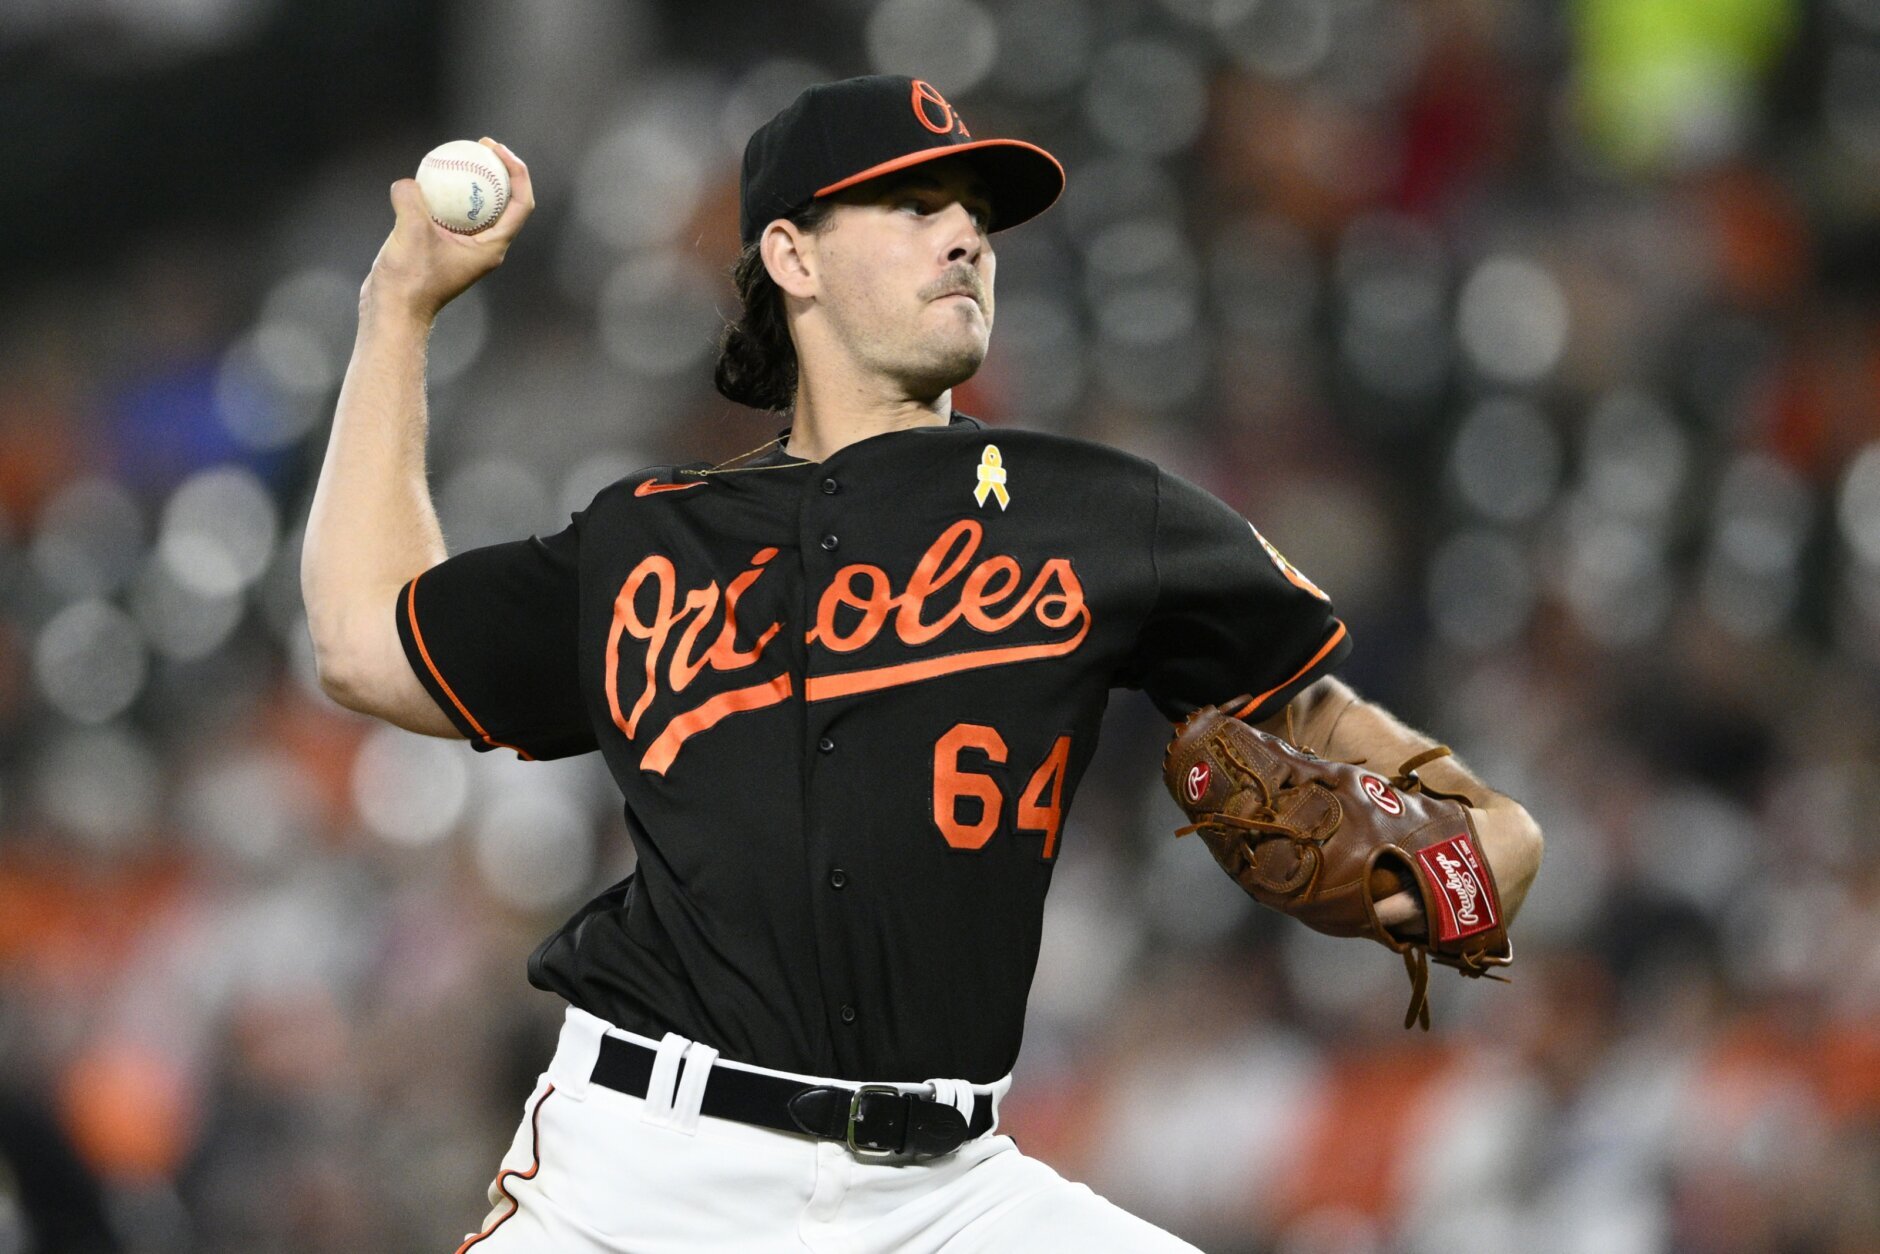 Henderson doubles twice in home debut, Orioles beat A's 5-2 - WTOP News